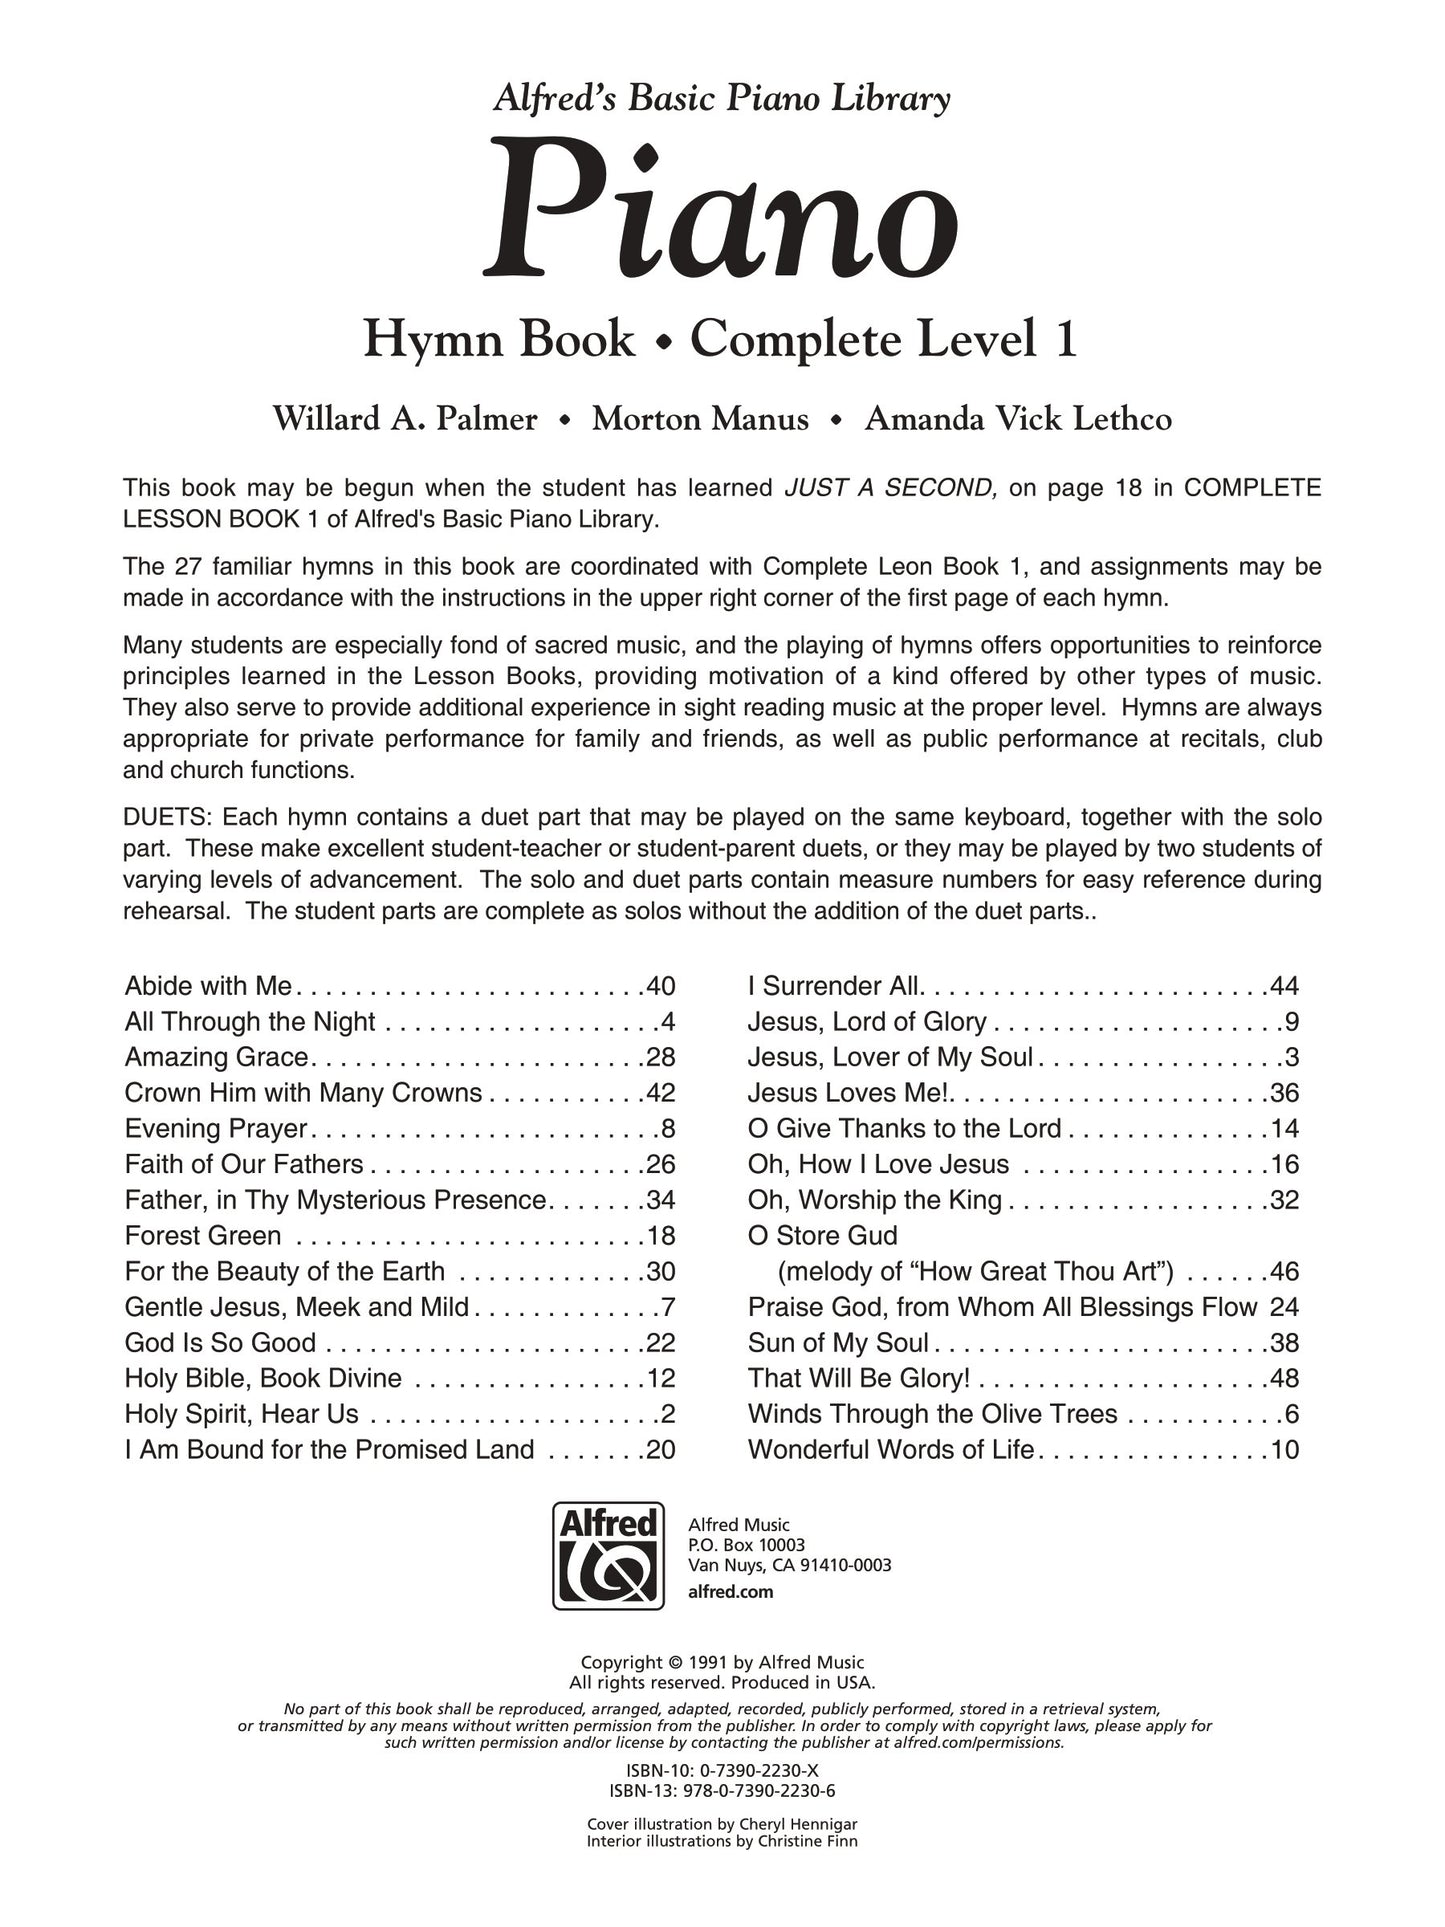 Alfred's Basic Piano Library - Hymn Book Complete Level 1 (1A/1B)